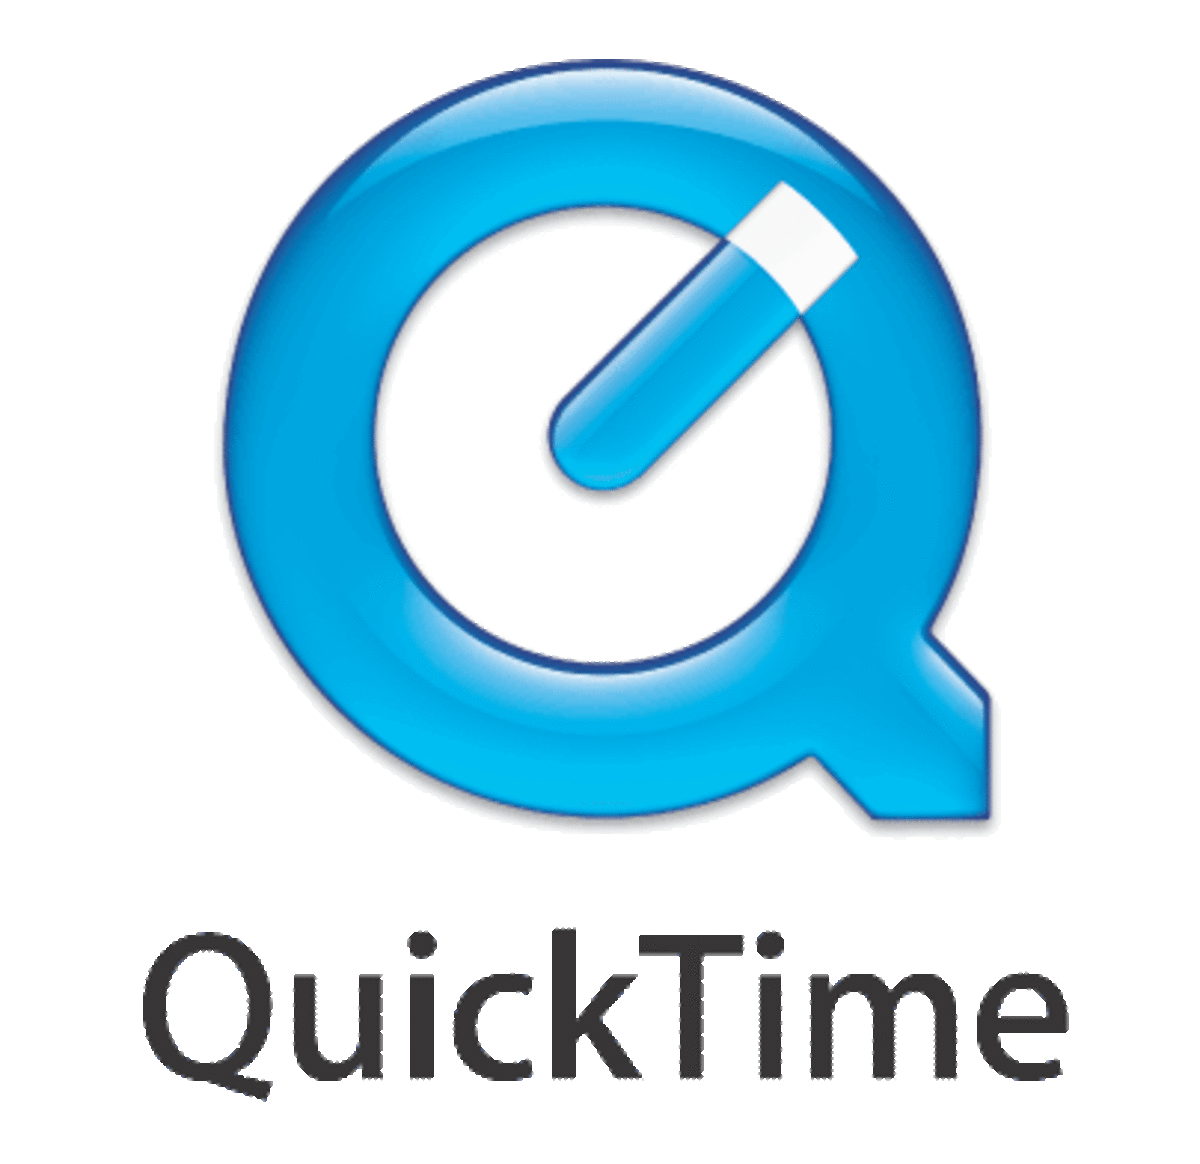 How to Make Stop Motion Video With Apple QuickTime Software